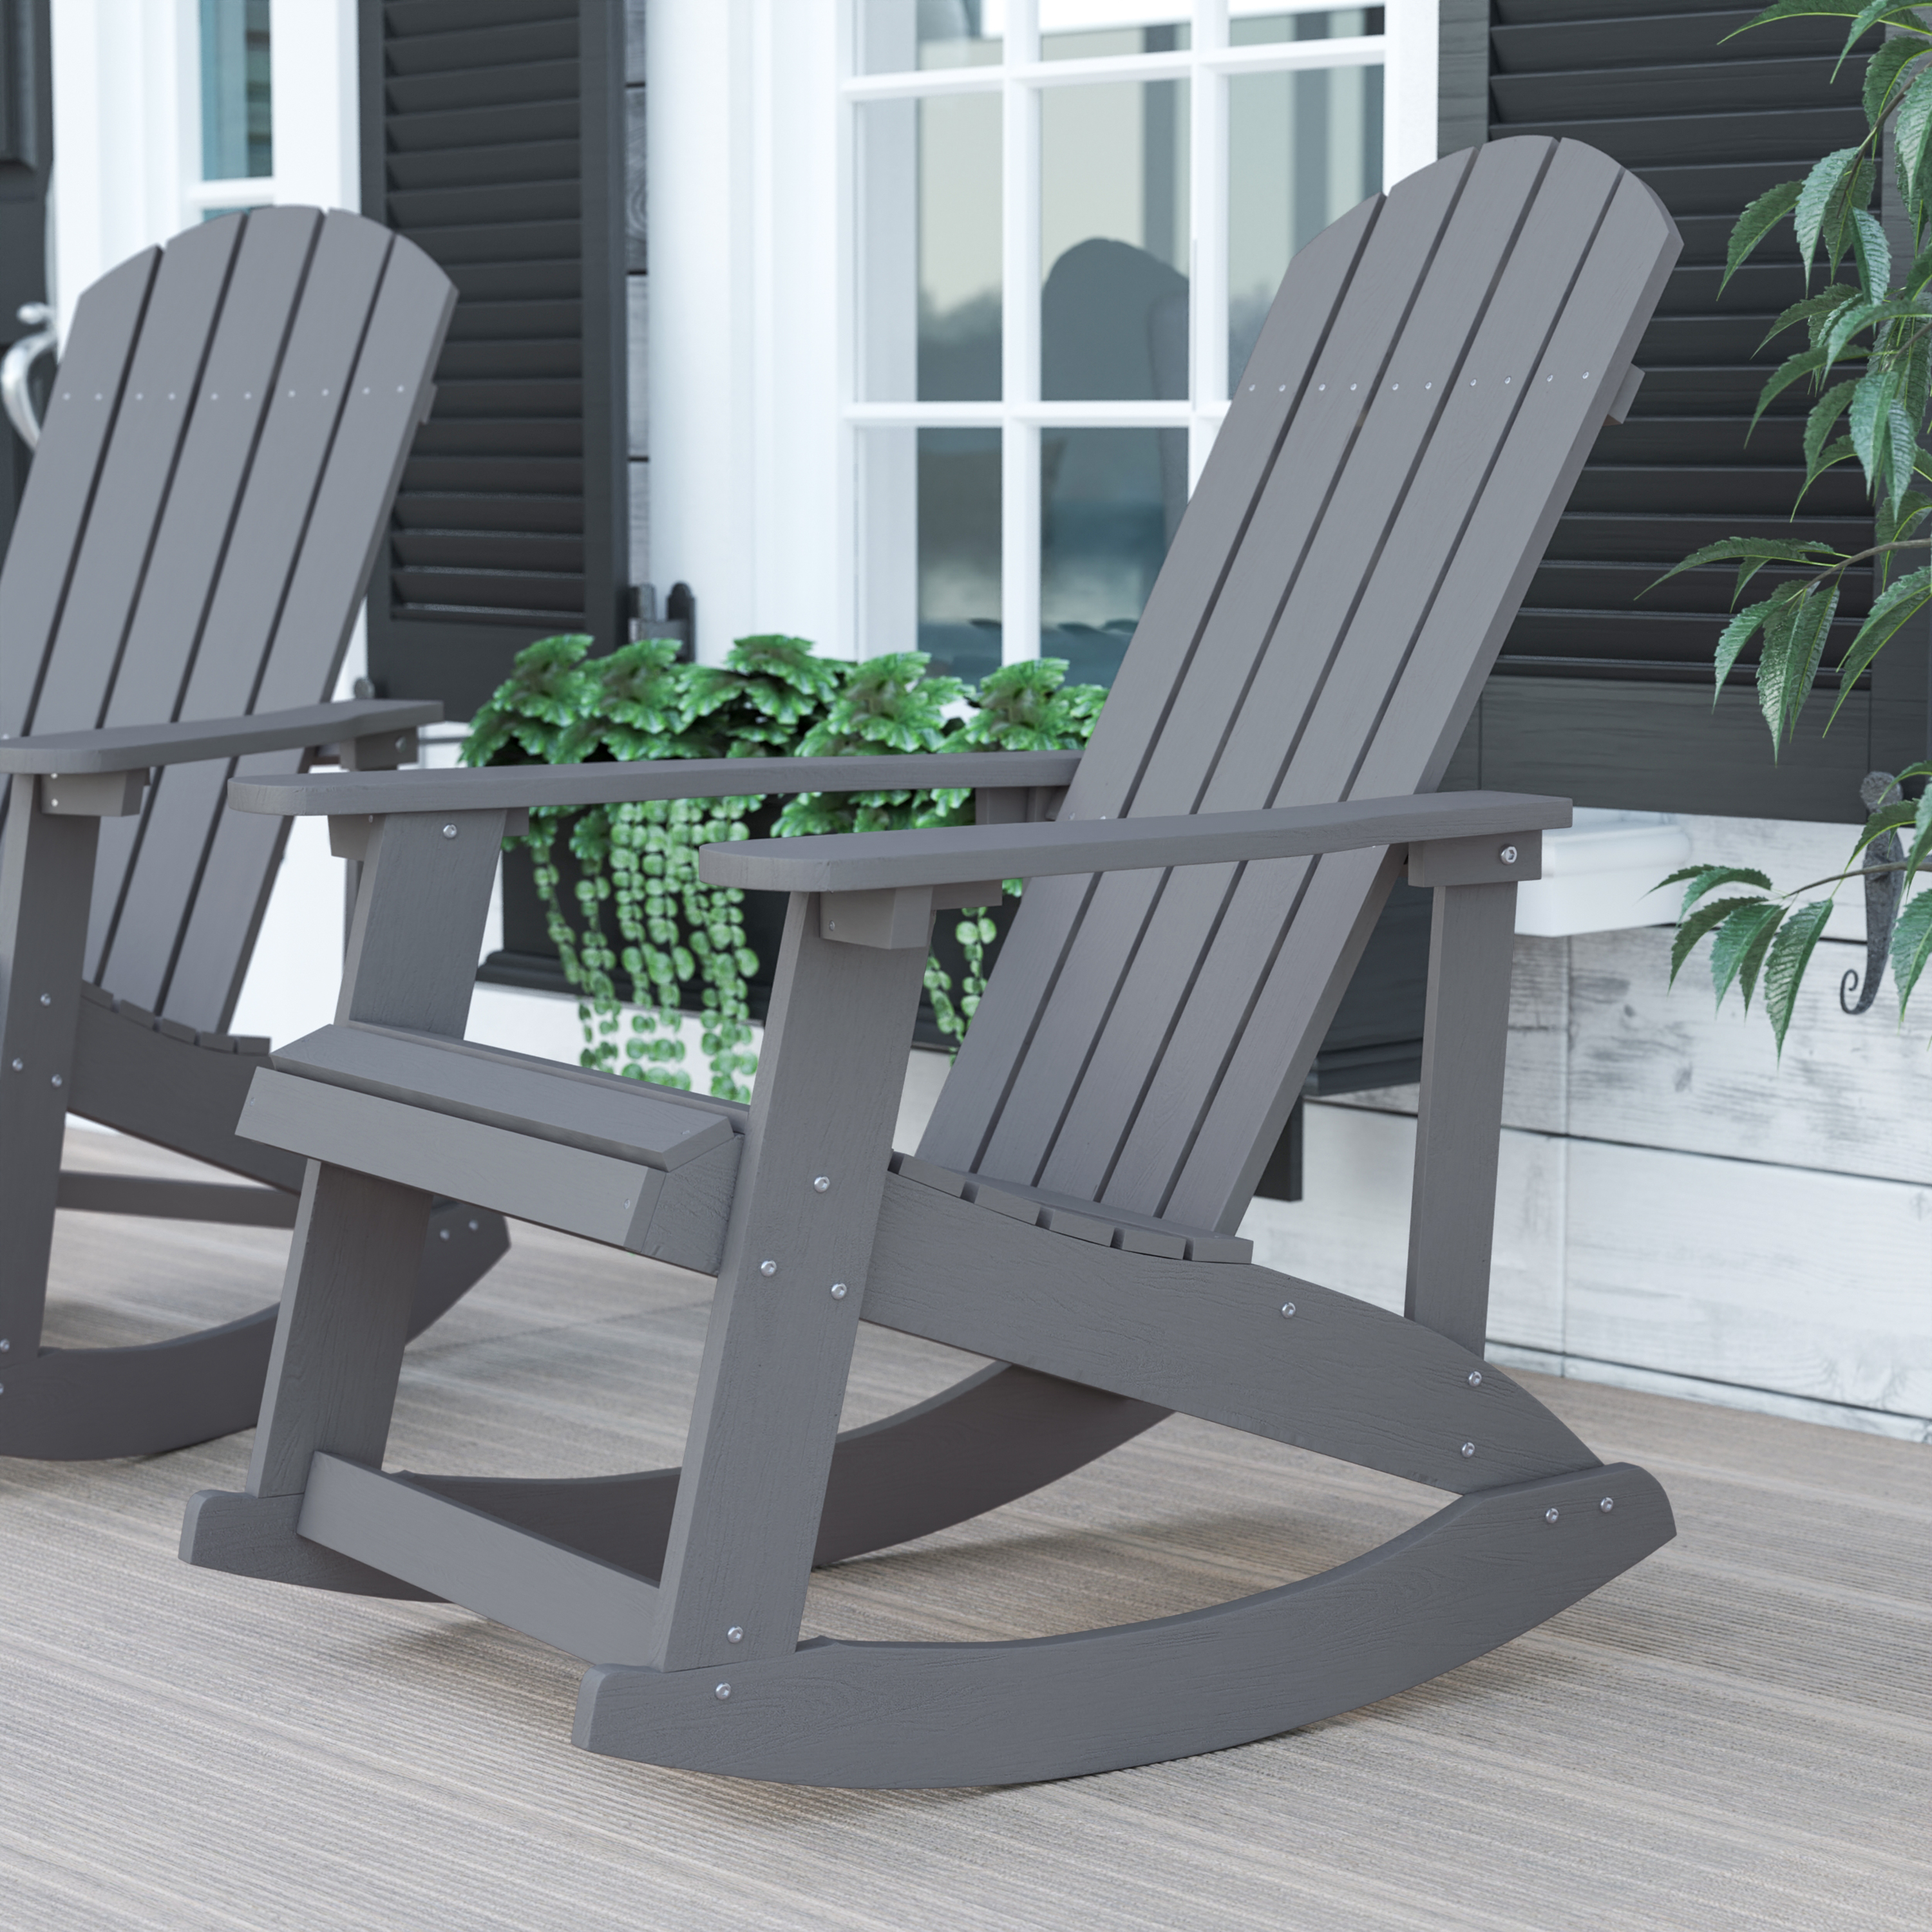 BizChair Commercial Grade All-Weather Poly Resin Wood Adirondack Rocking Chair with Rust Resistant Stainless Steel Hardware in Gray - image 1 of 11